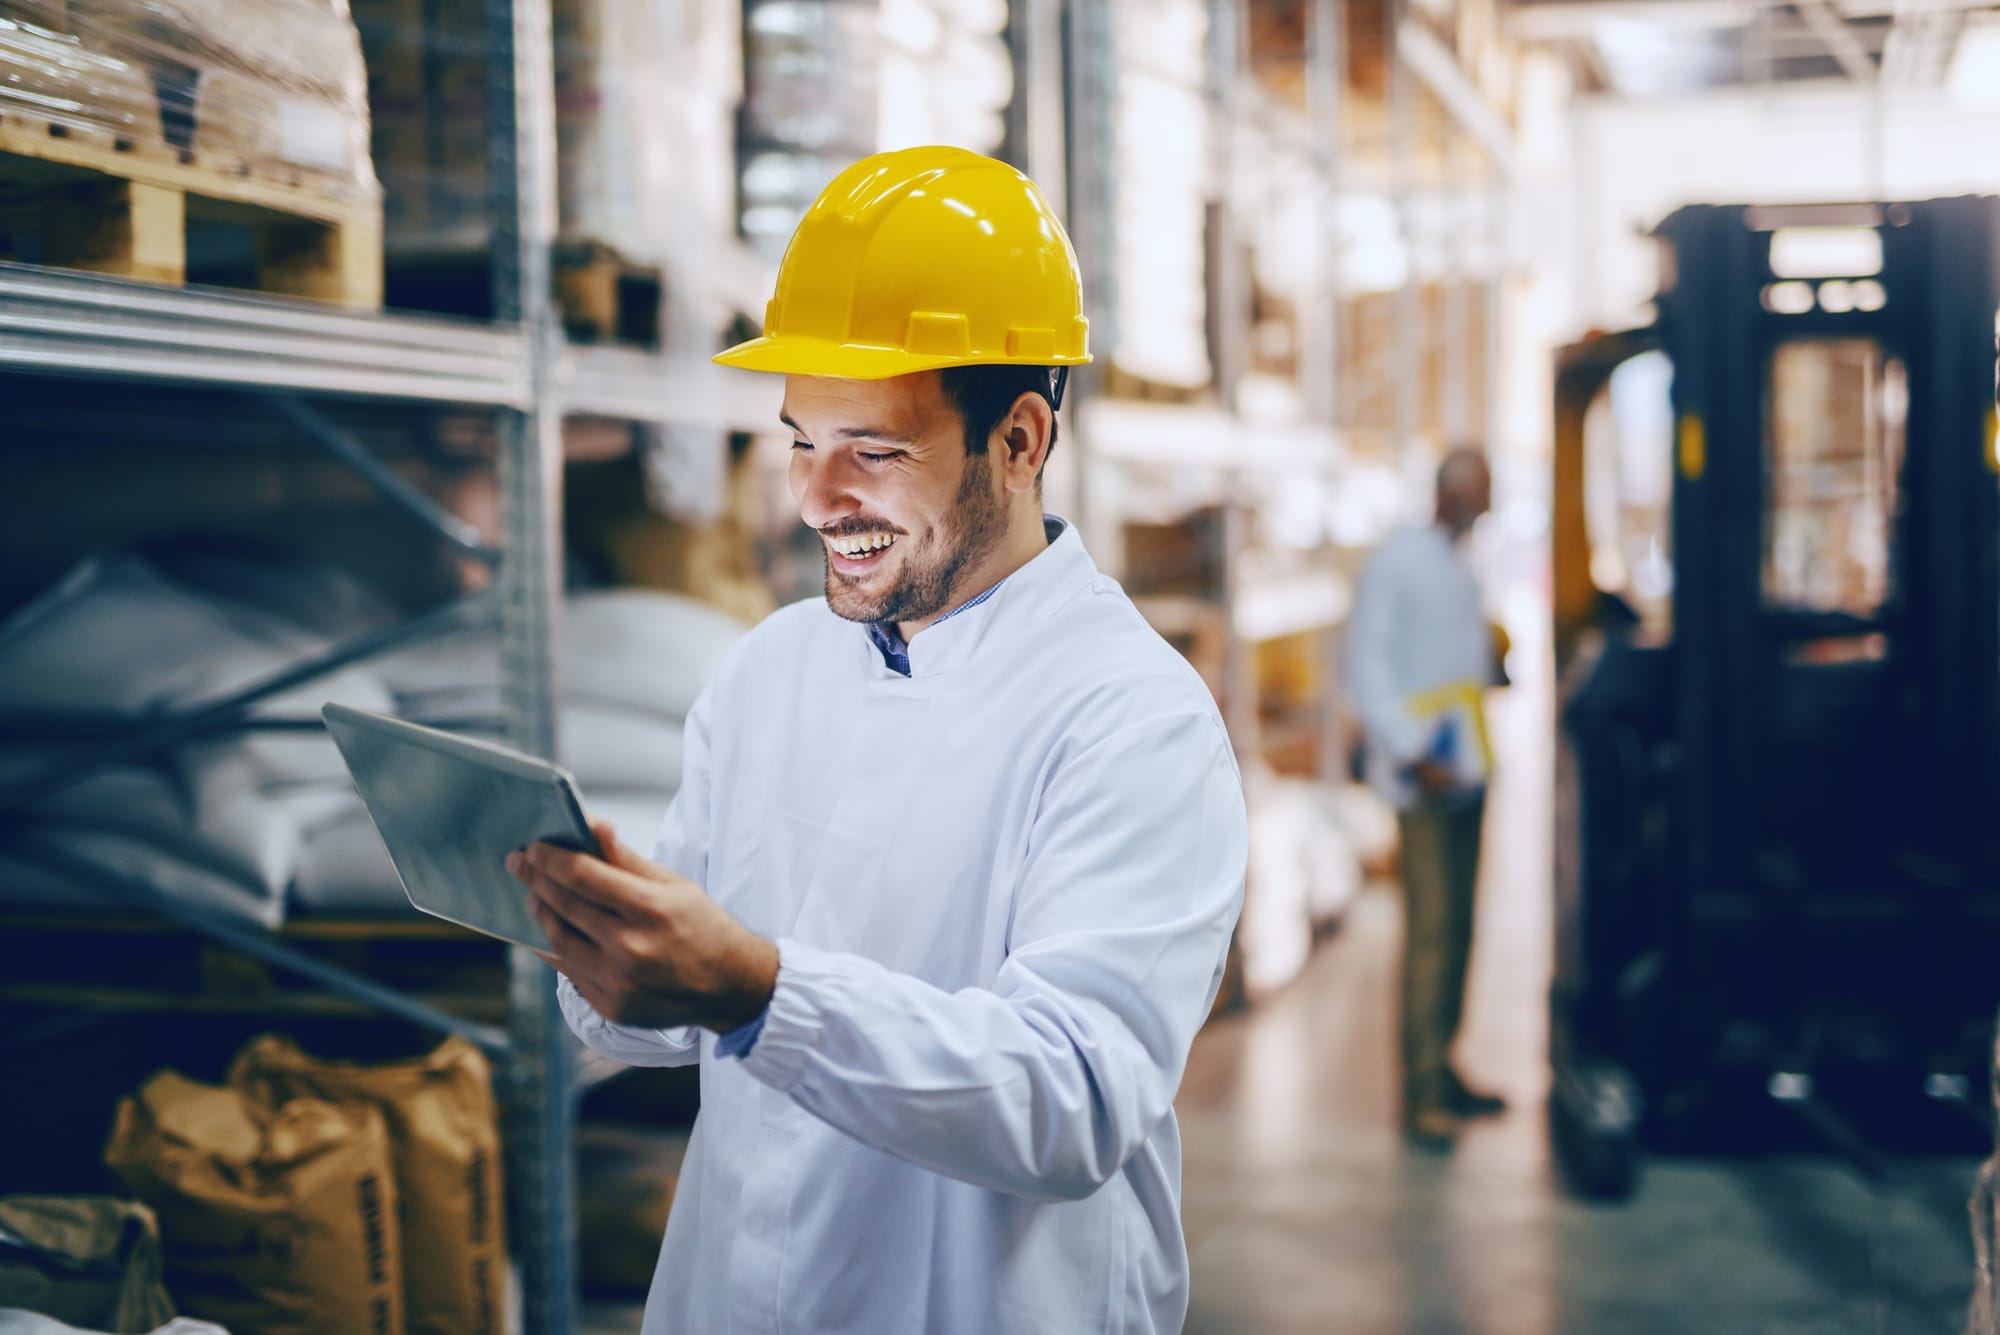 A warehouse worker with a yellow hat staring at his tablet PC to check inventory.